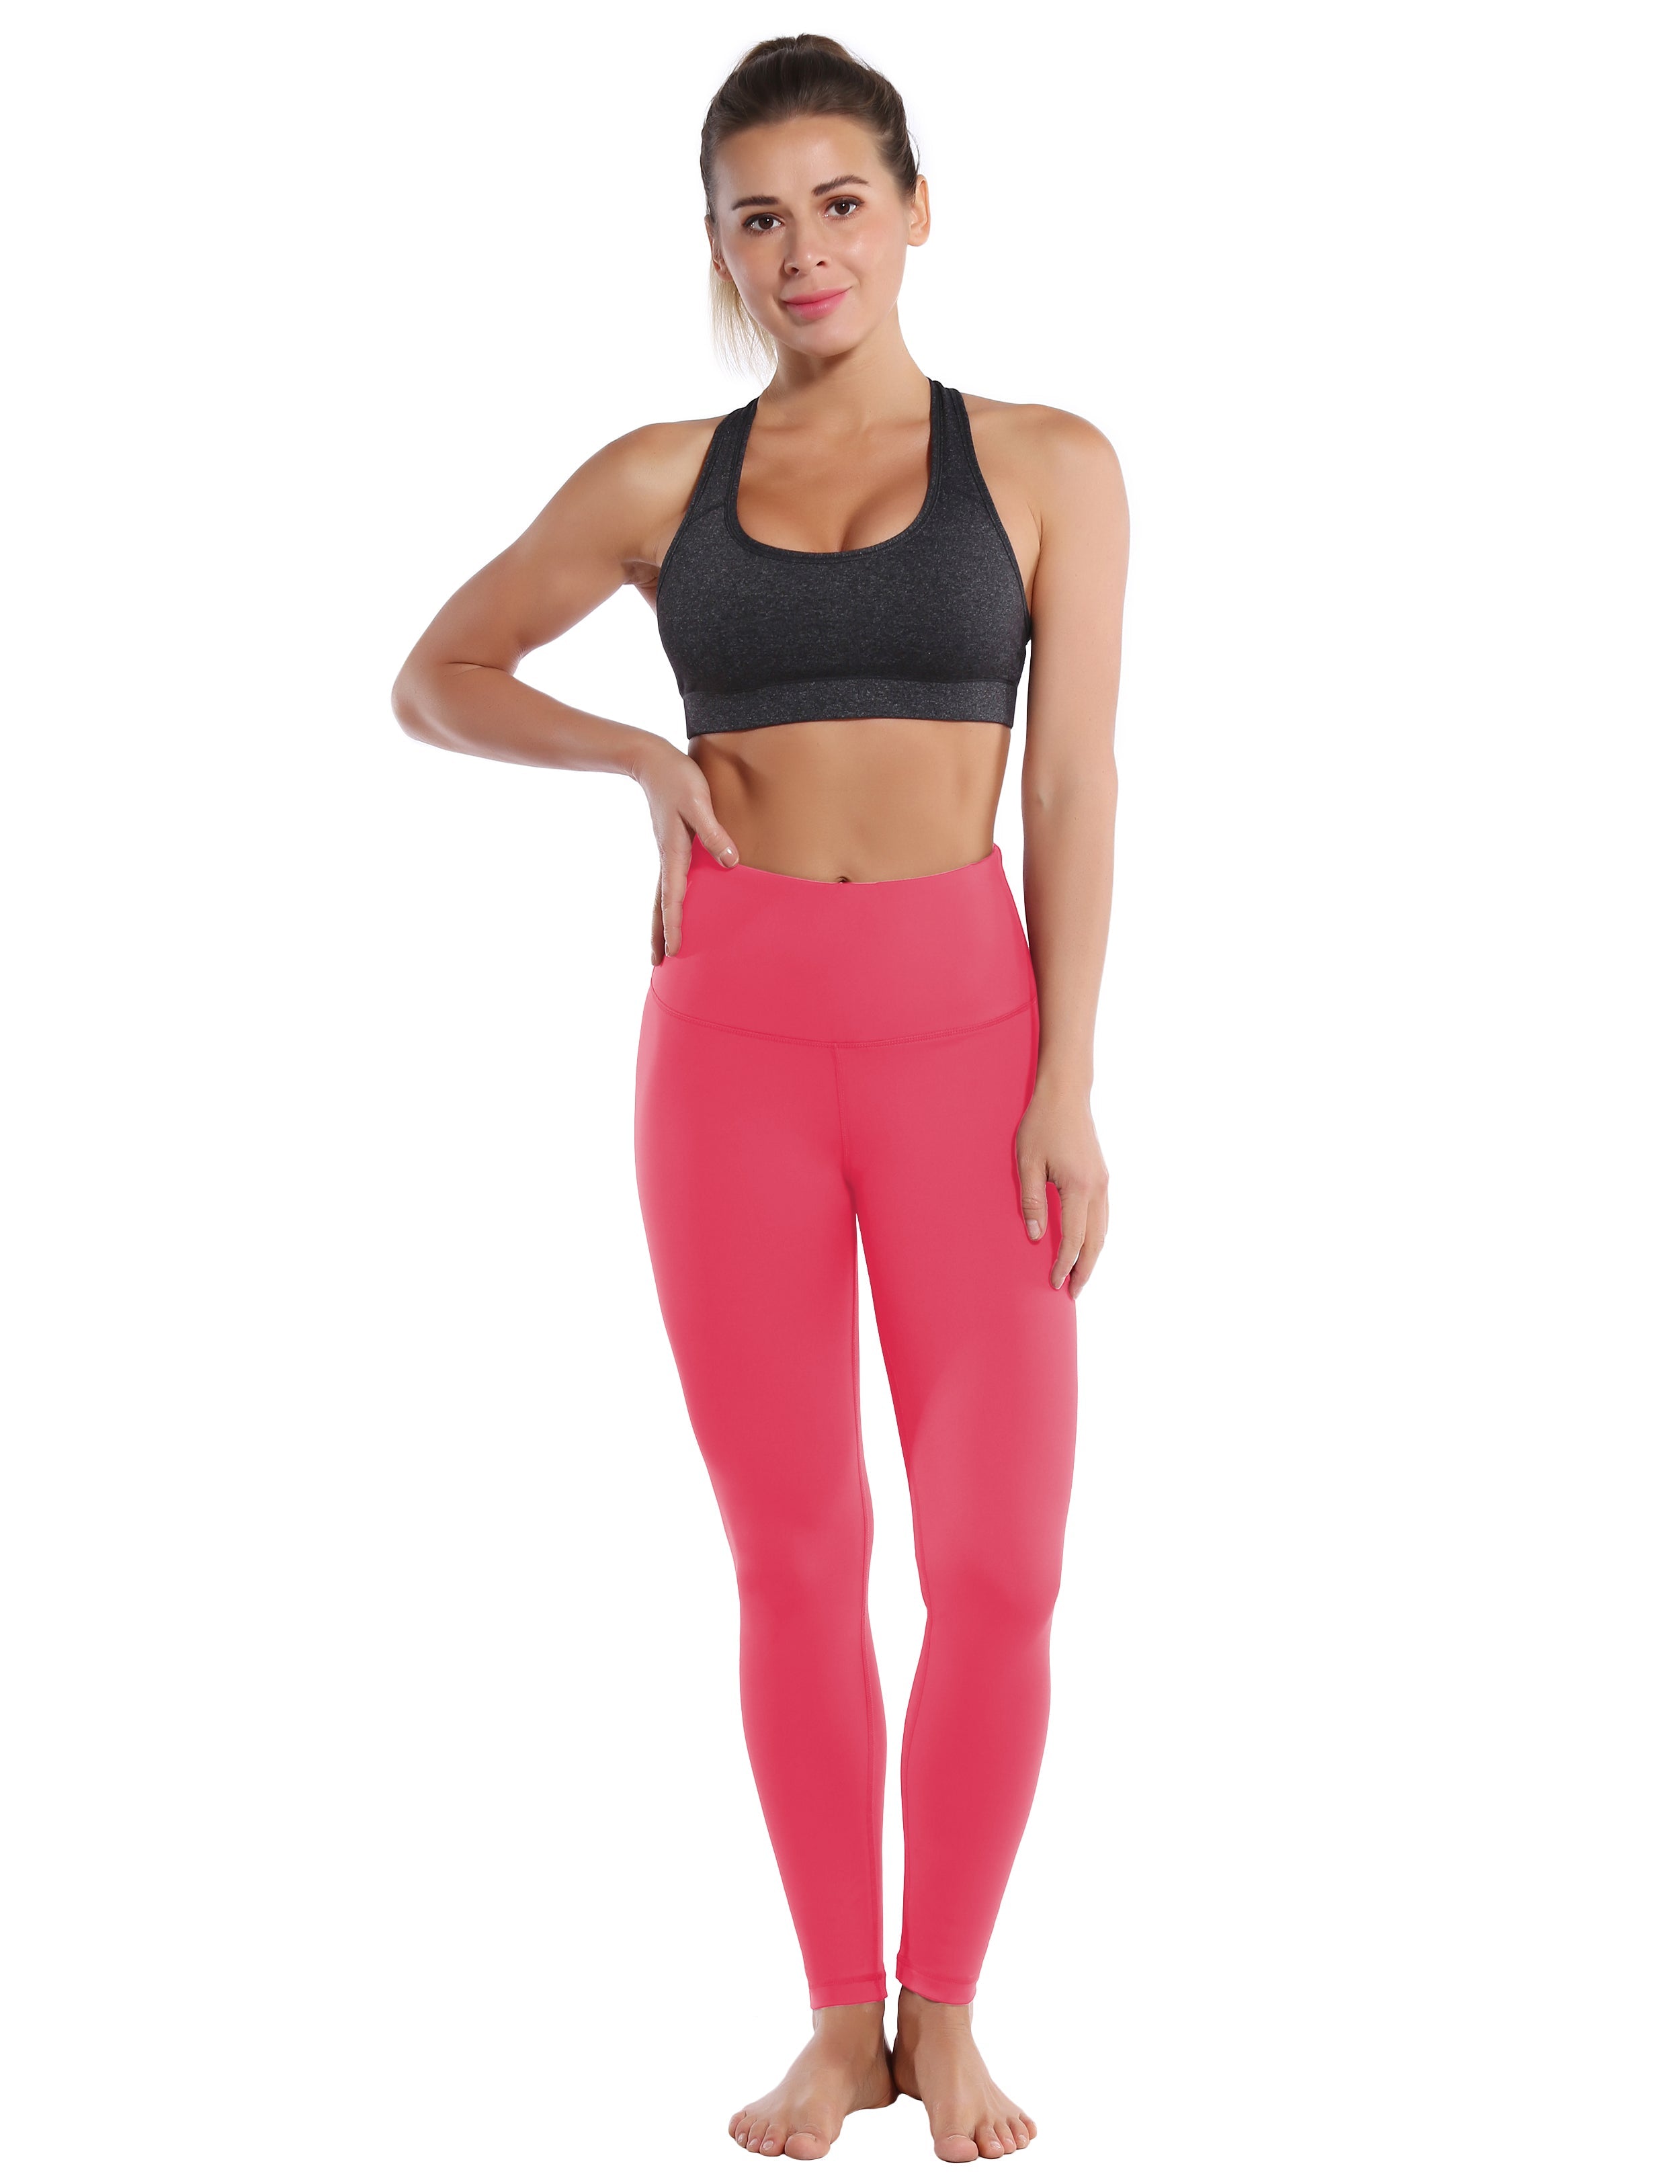 High Waist Running Pants rosecoral 75%Nylon/25%Spandex Fabric doesn't attract lint easily 4-way stretch No see-through Moisture-wicking Tummy control Inner pocket Four lengths